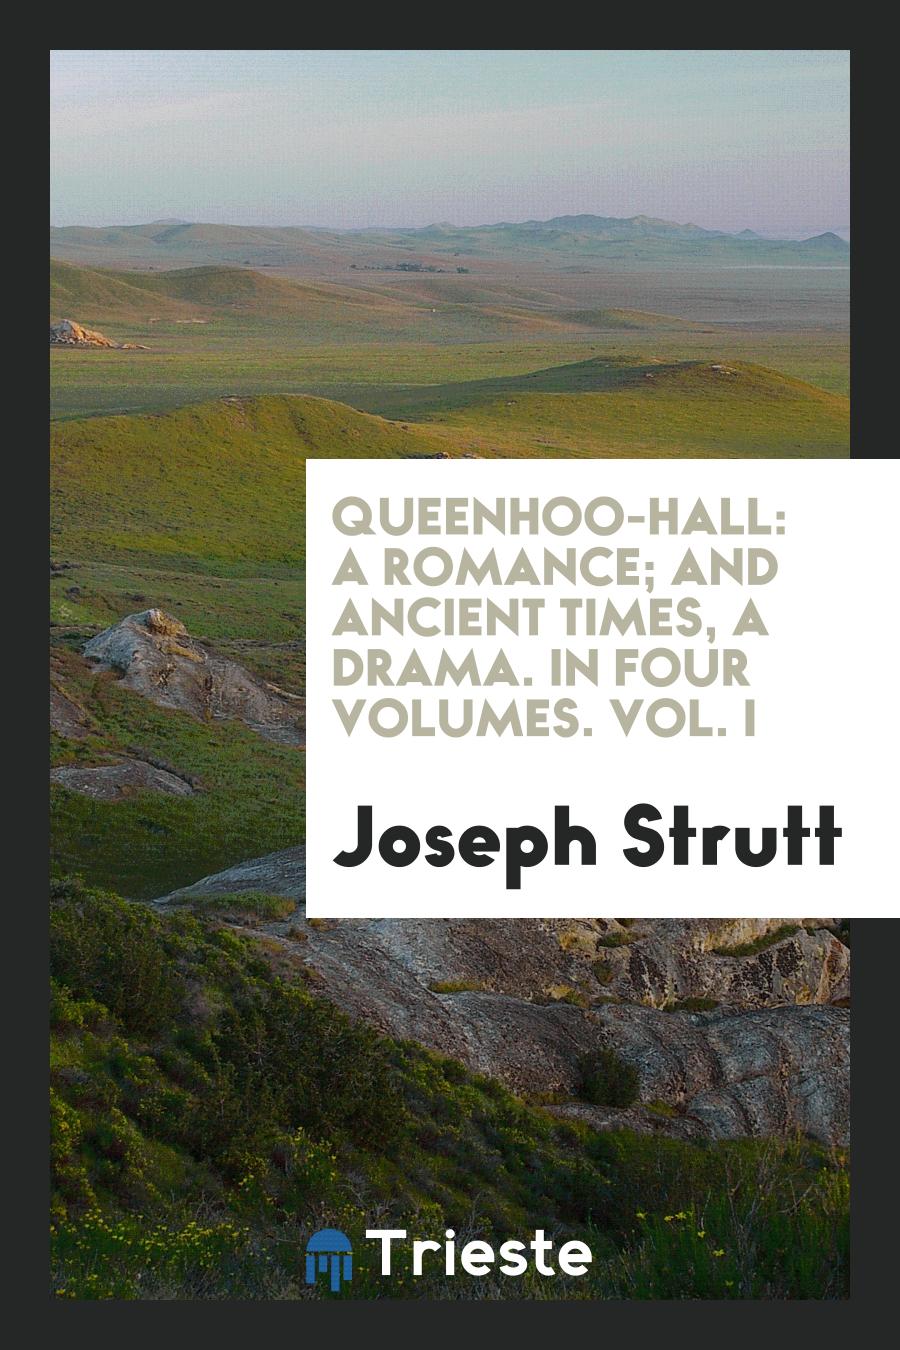 Queenhoo-Hall: A Romance; and Ancient times, a Drama. In Four Volumes. Vol. I